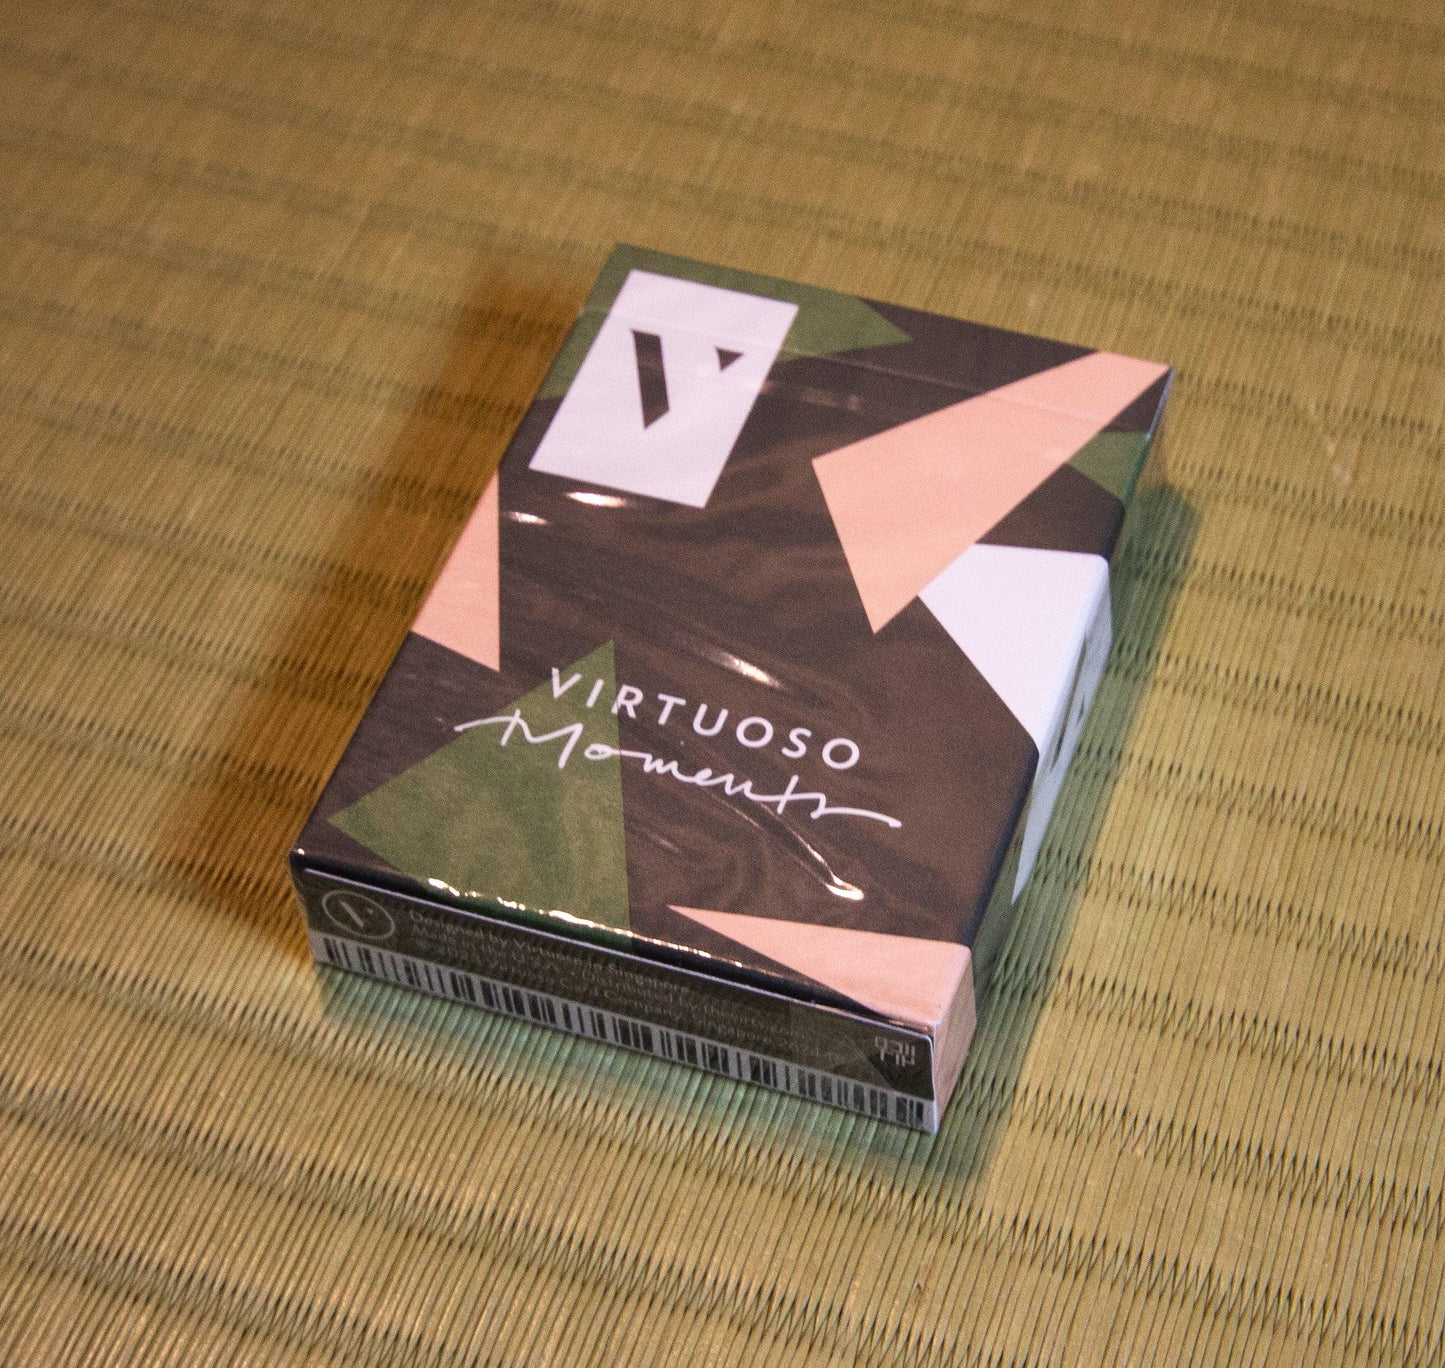 Virtuoso Open Court II Playing Cards by The Virts - Deckita Decks